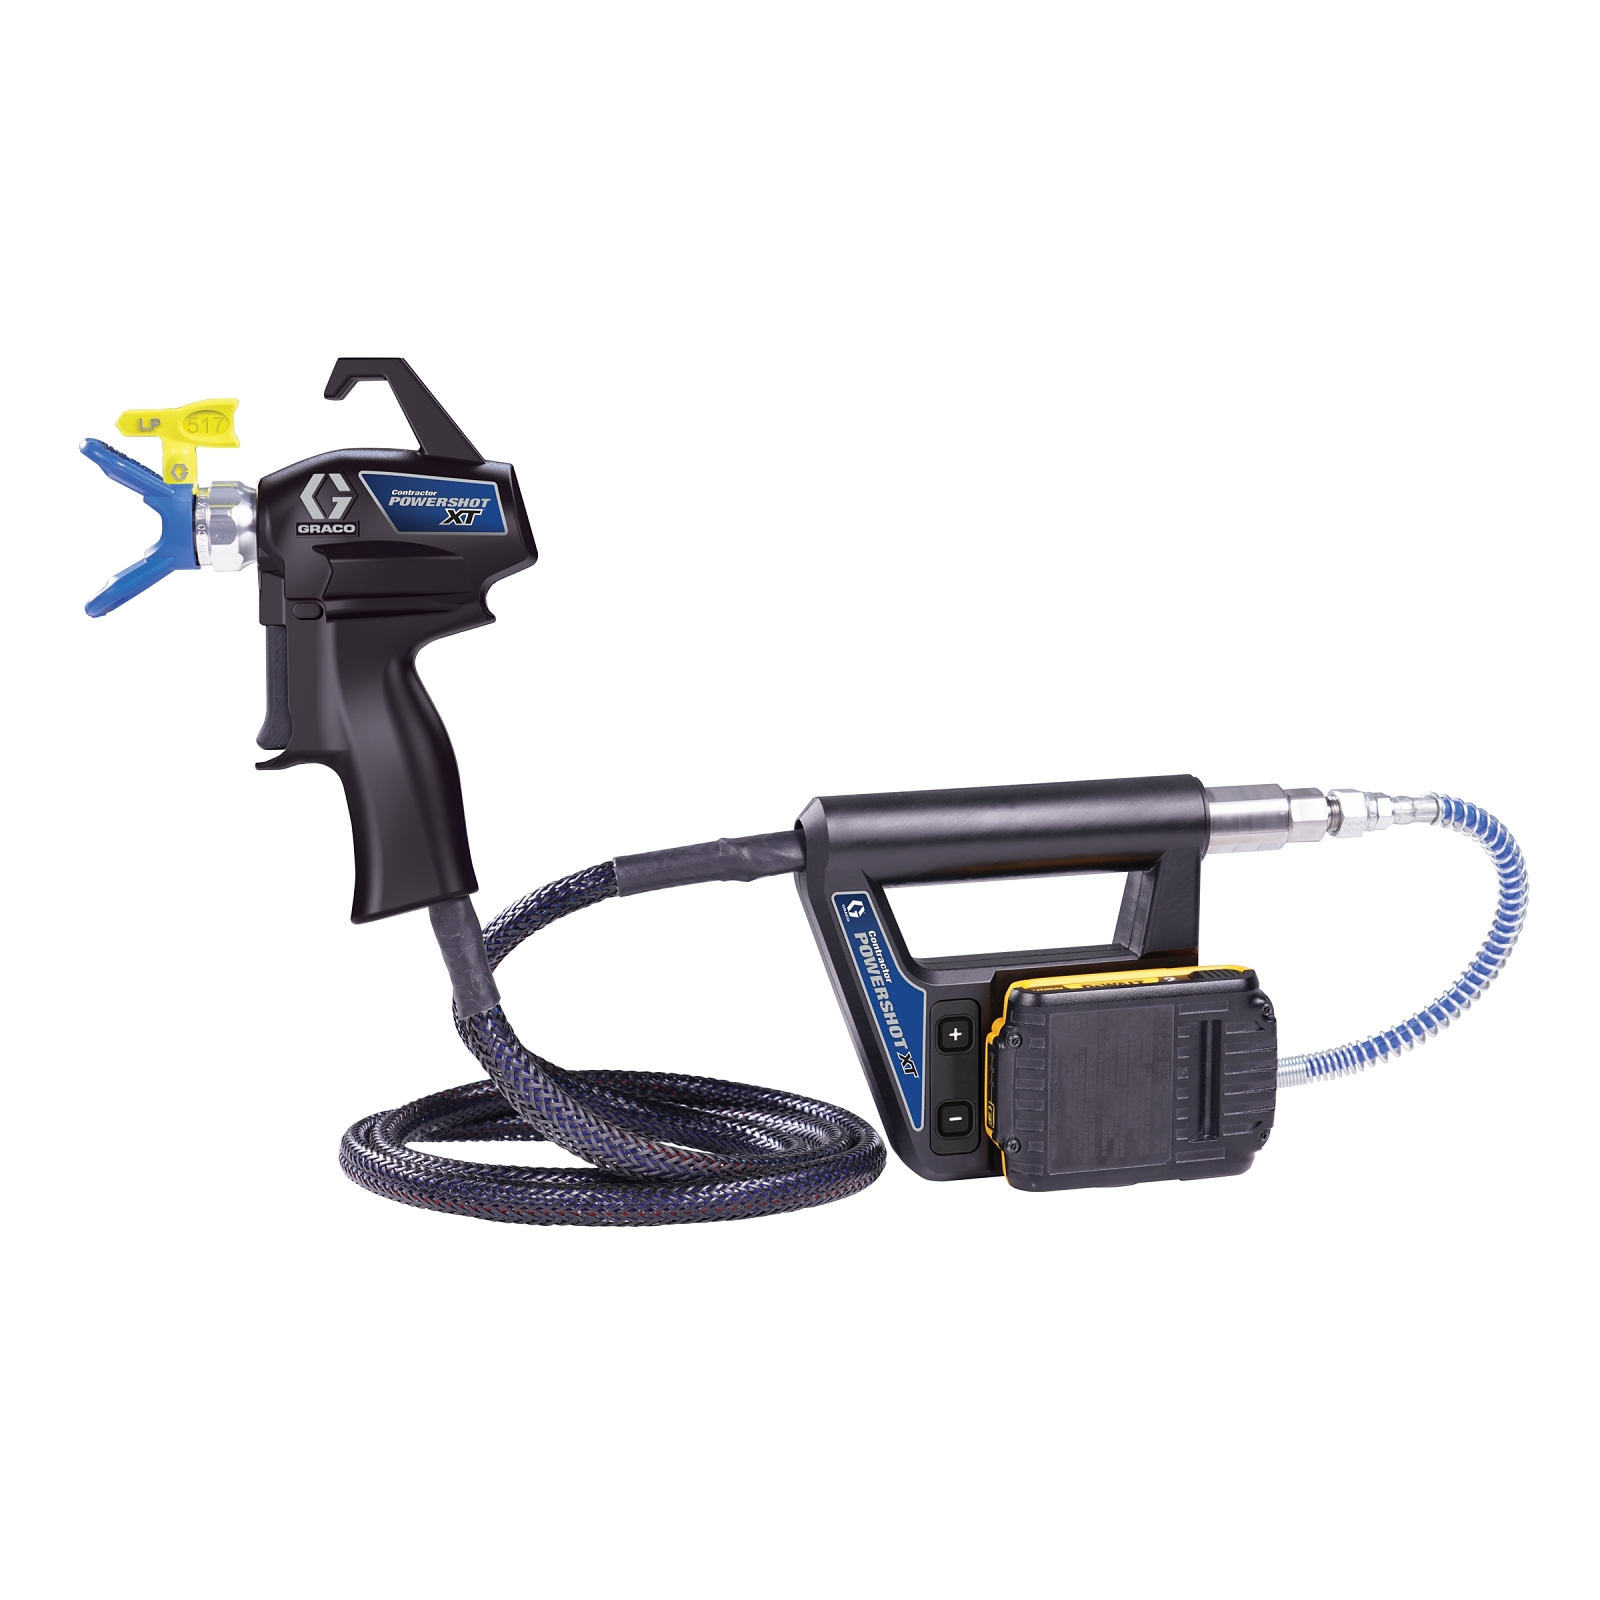 Graco Products & Support for Contractors